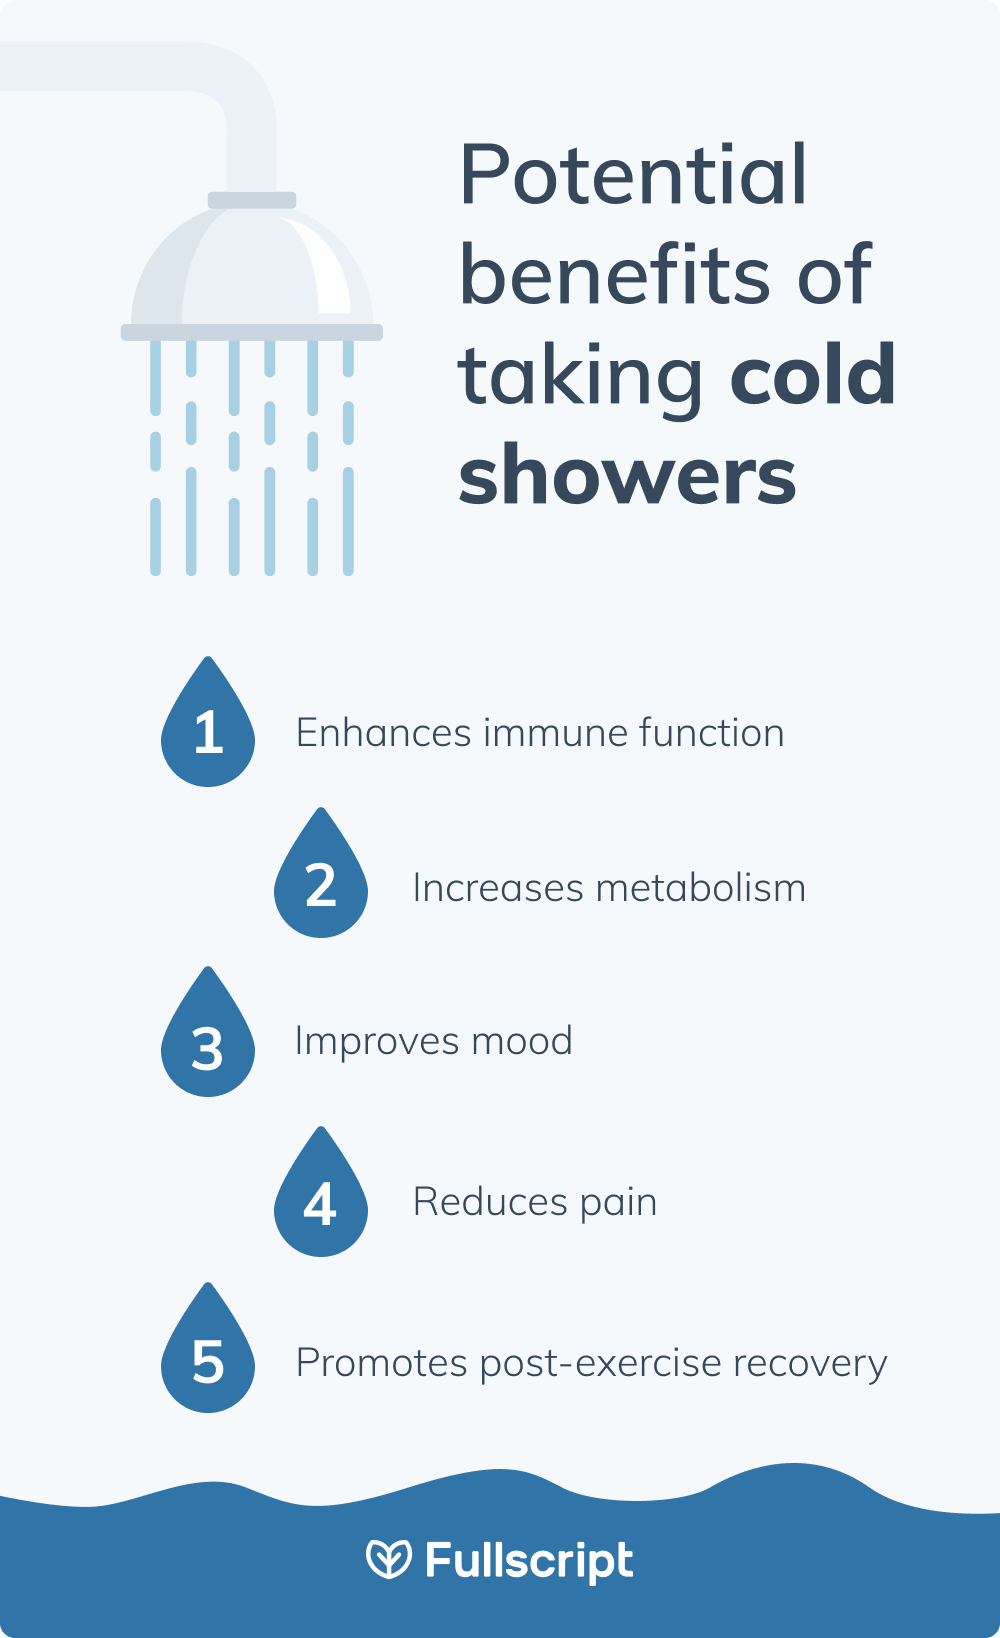 Benefits of cold showers infographic